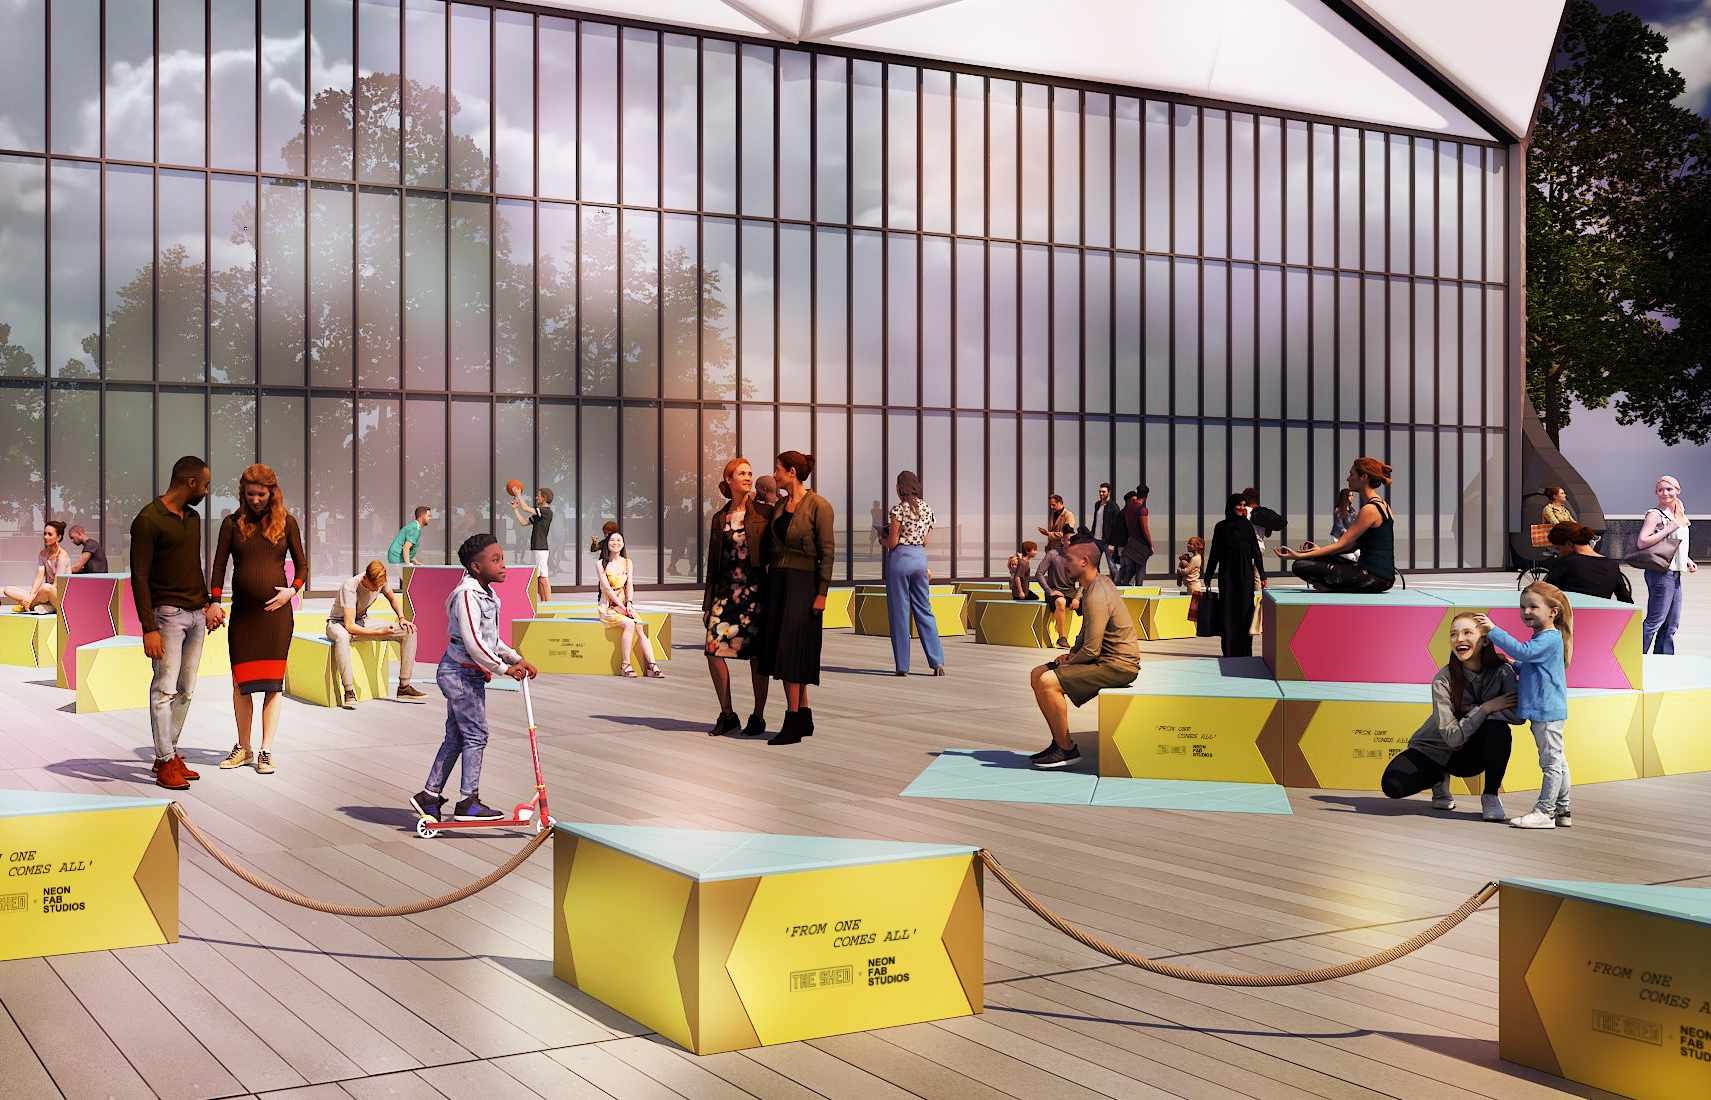 A digital rendering of The Shed's outdoor Plaza with modular seating components arranged. The components are triangular shapes with light blue tops and yellow sides. Visitors walk and ride scooters on the plaza, some of them sitting on the modules.